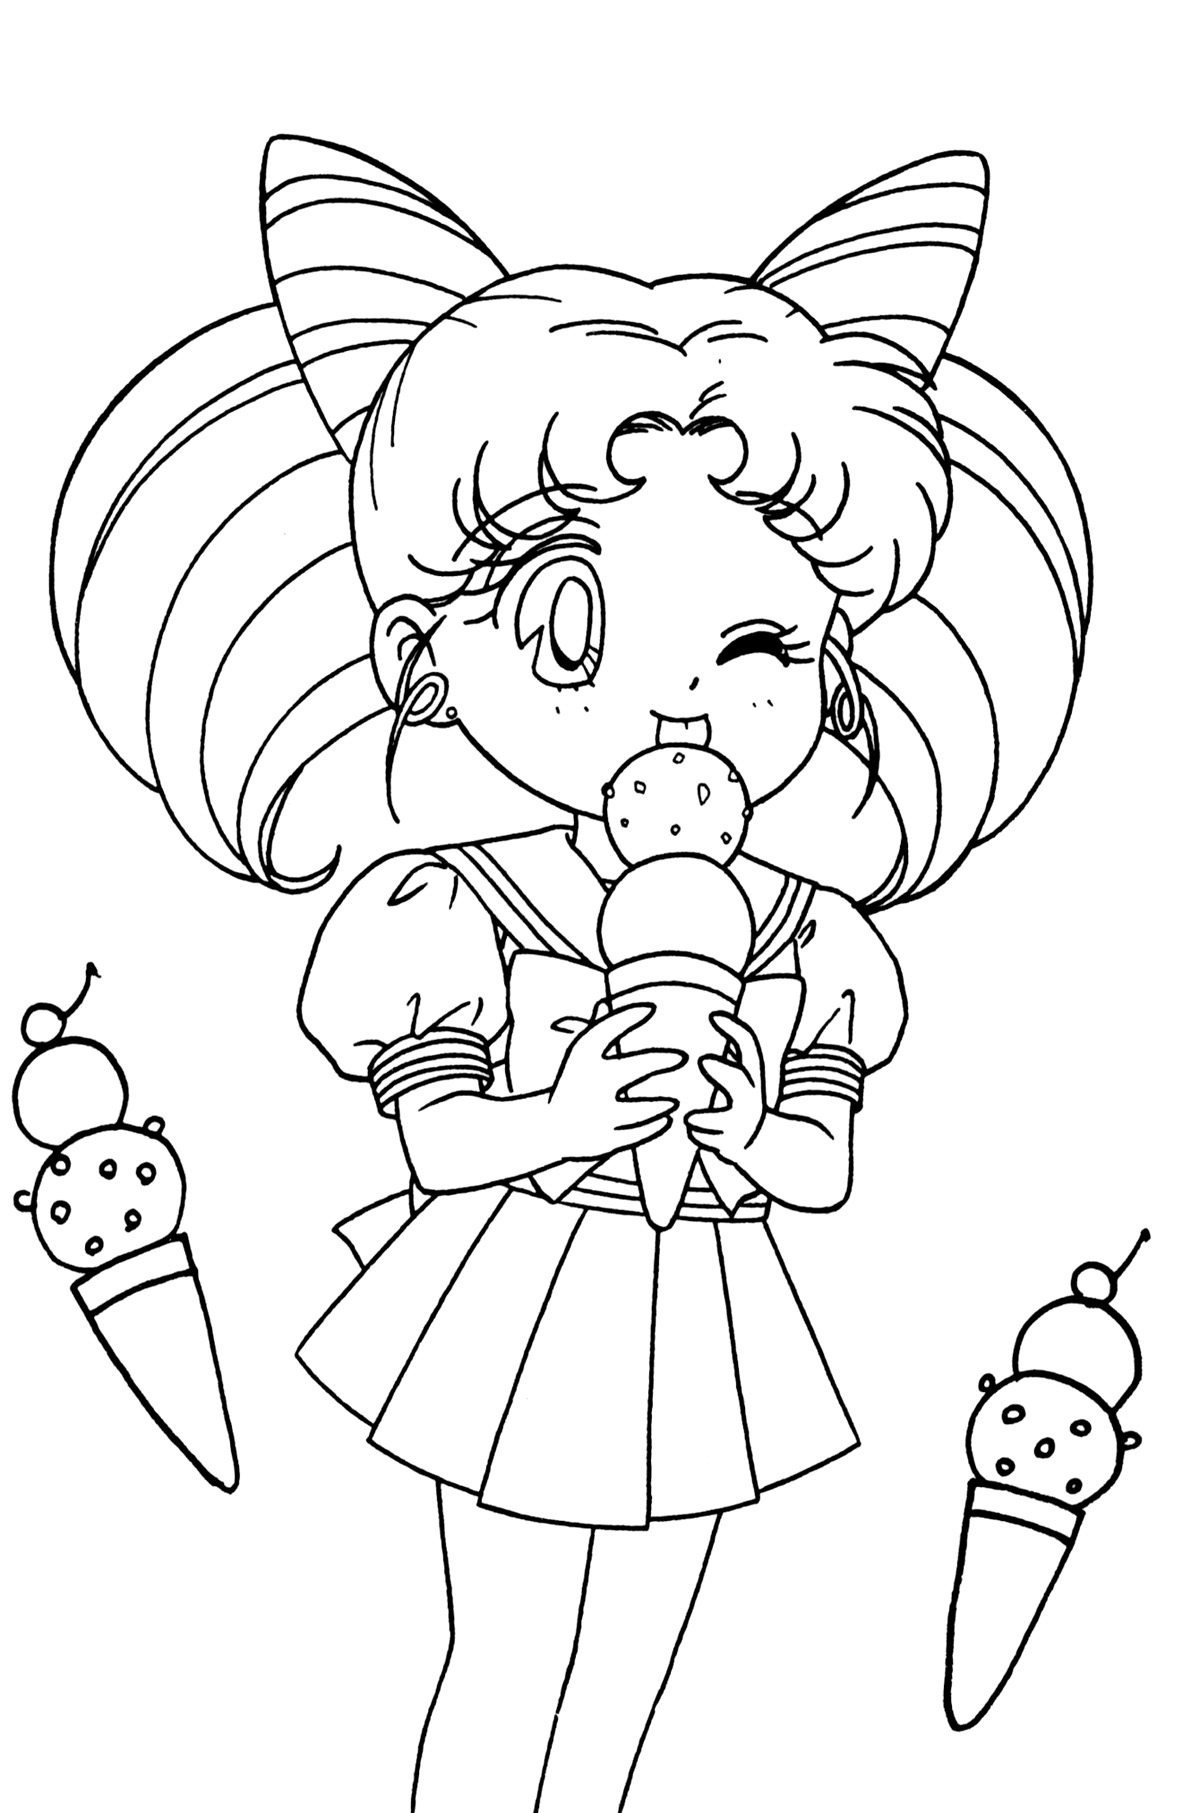 Sailor Moon Coloring Pages At GetDrawings Free Download